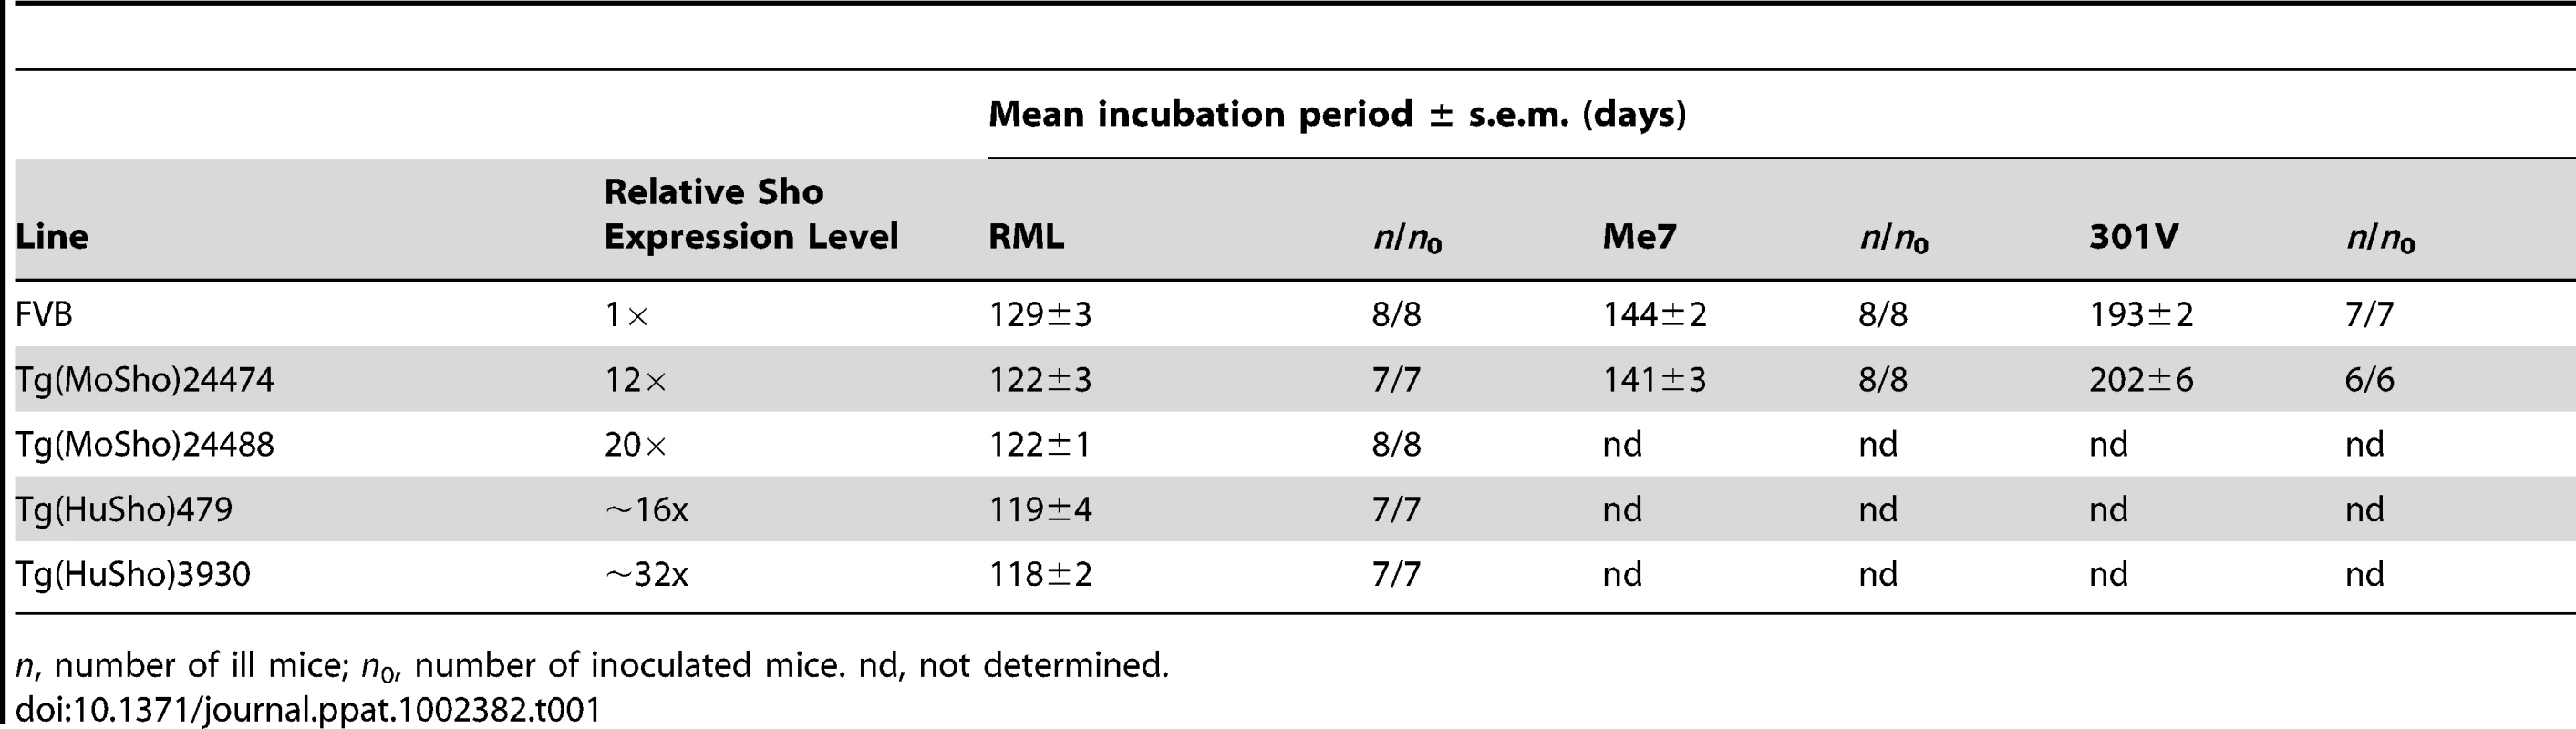 Incubation periods in Tg(Sho) mice following inoculation with different prion strains.